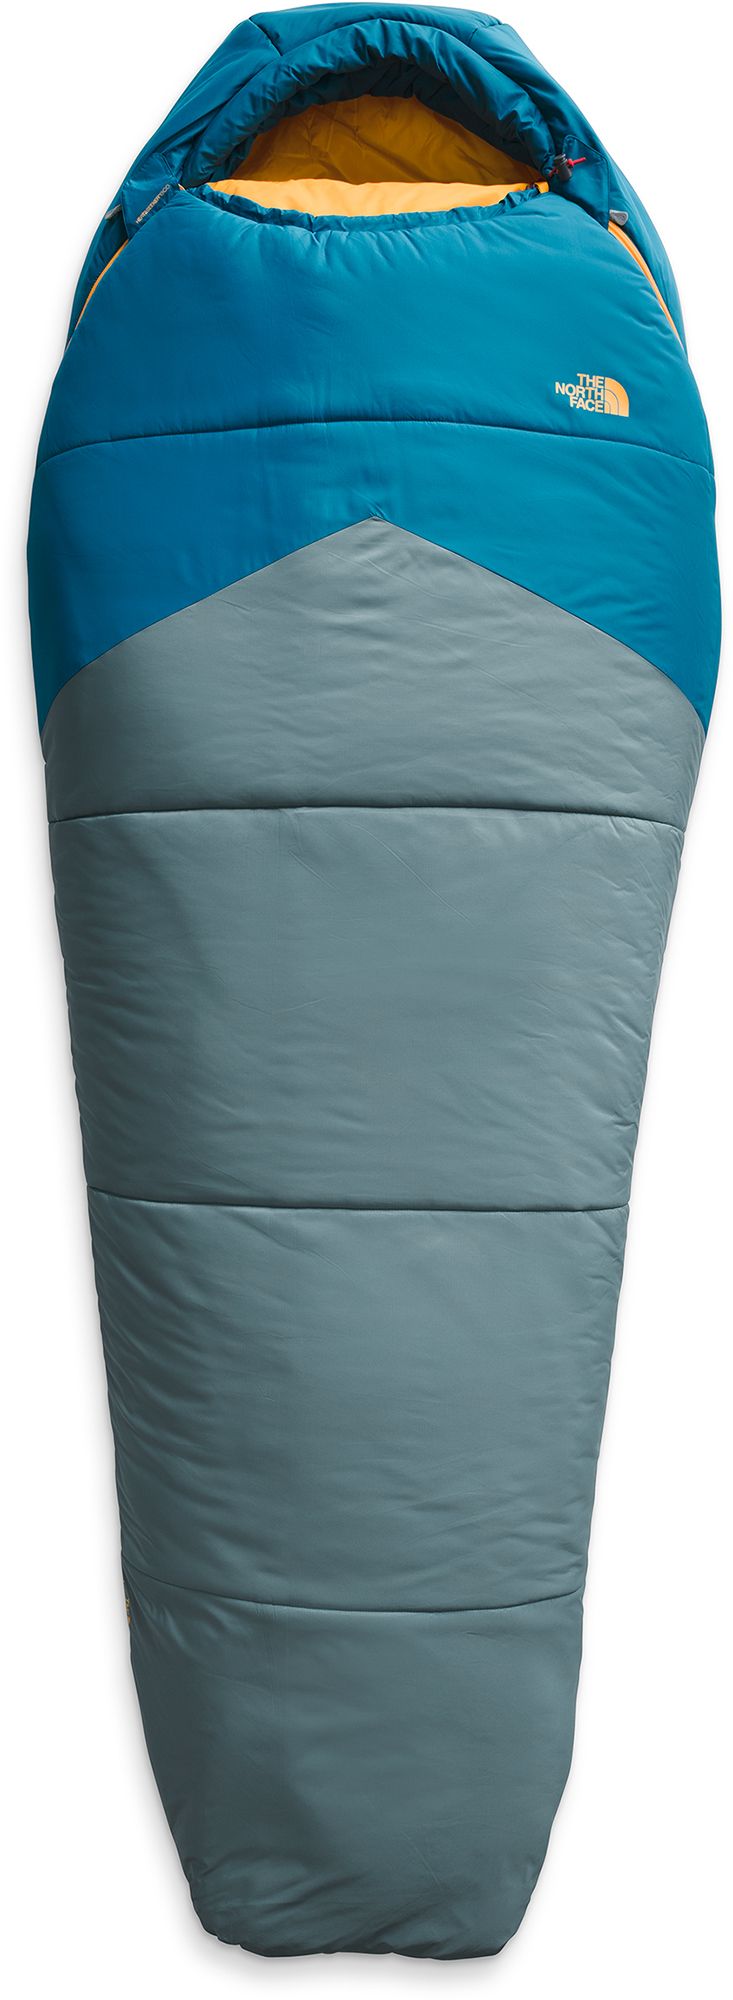 Photos - Suitcase / Backpack Cover The North Face Wasatch Pro 20 Sleeping Bag, Men's, Regular, Banff Blue/gob 